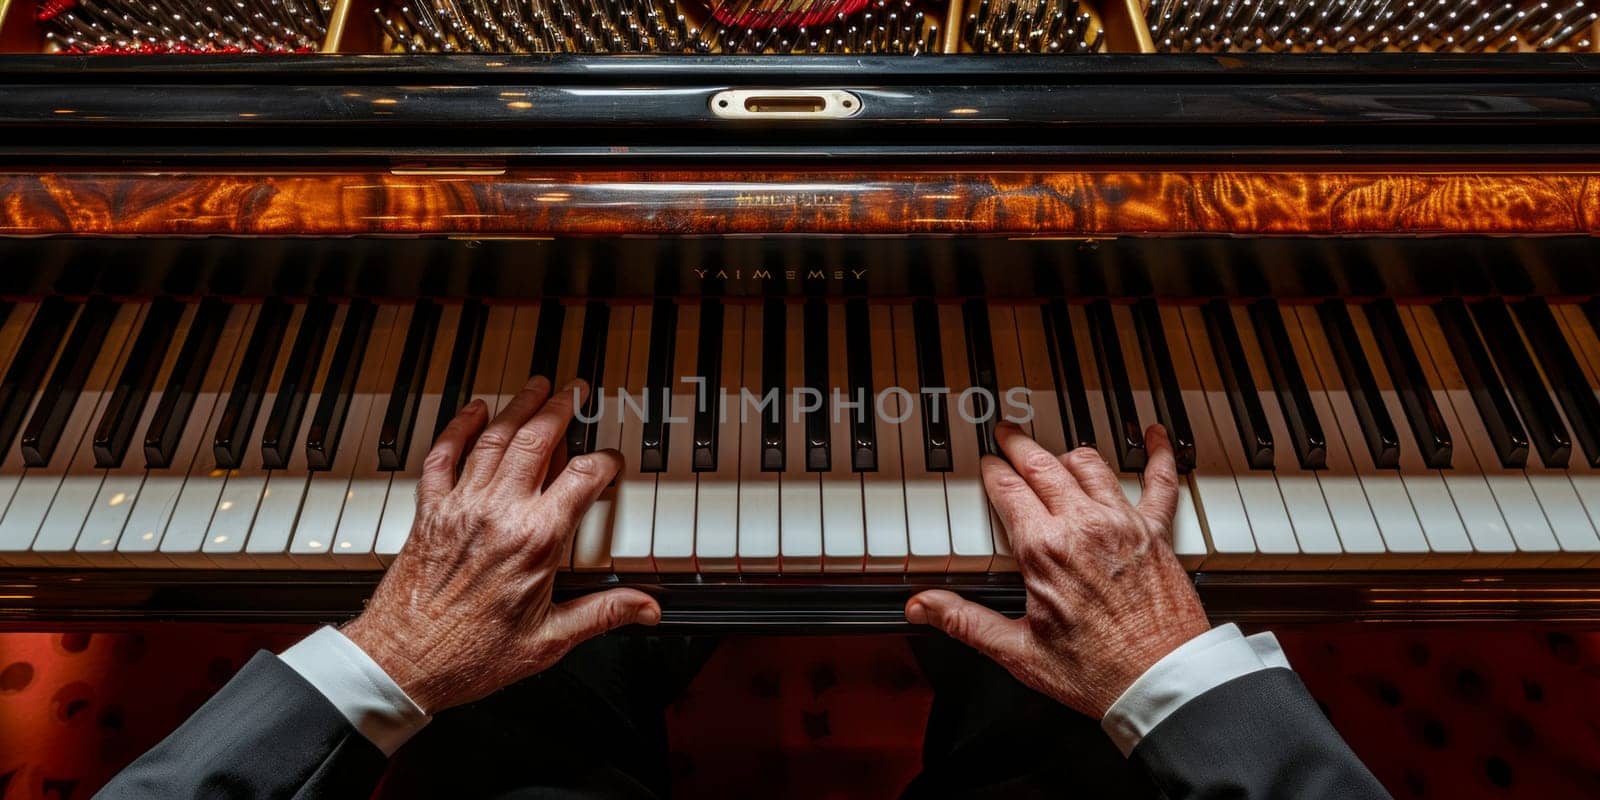 A man in a stylish suit passionately playing a grand piano, his fingers elegantly dancing across the keys, creating beautiful music.